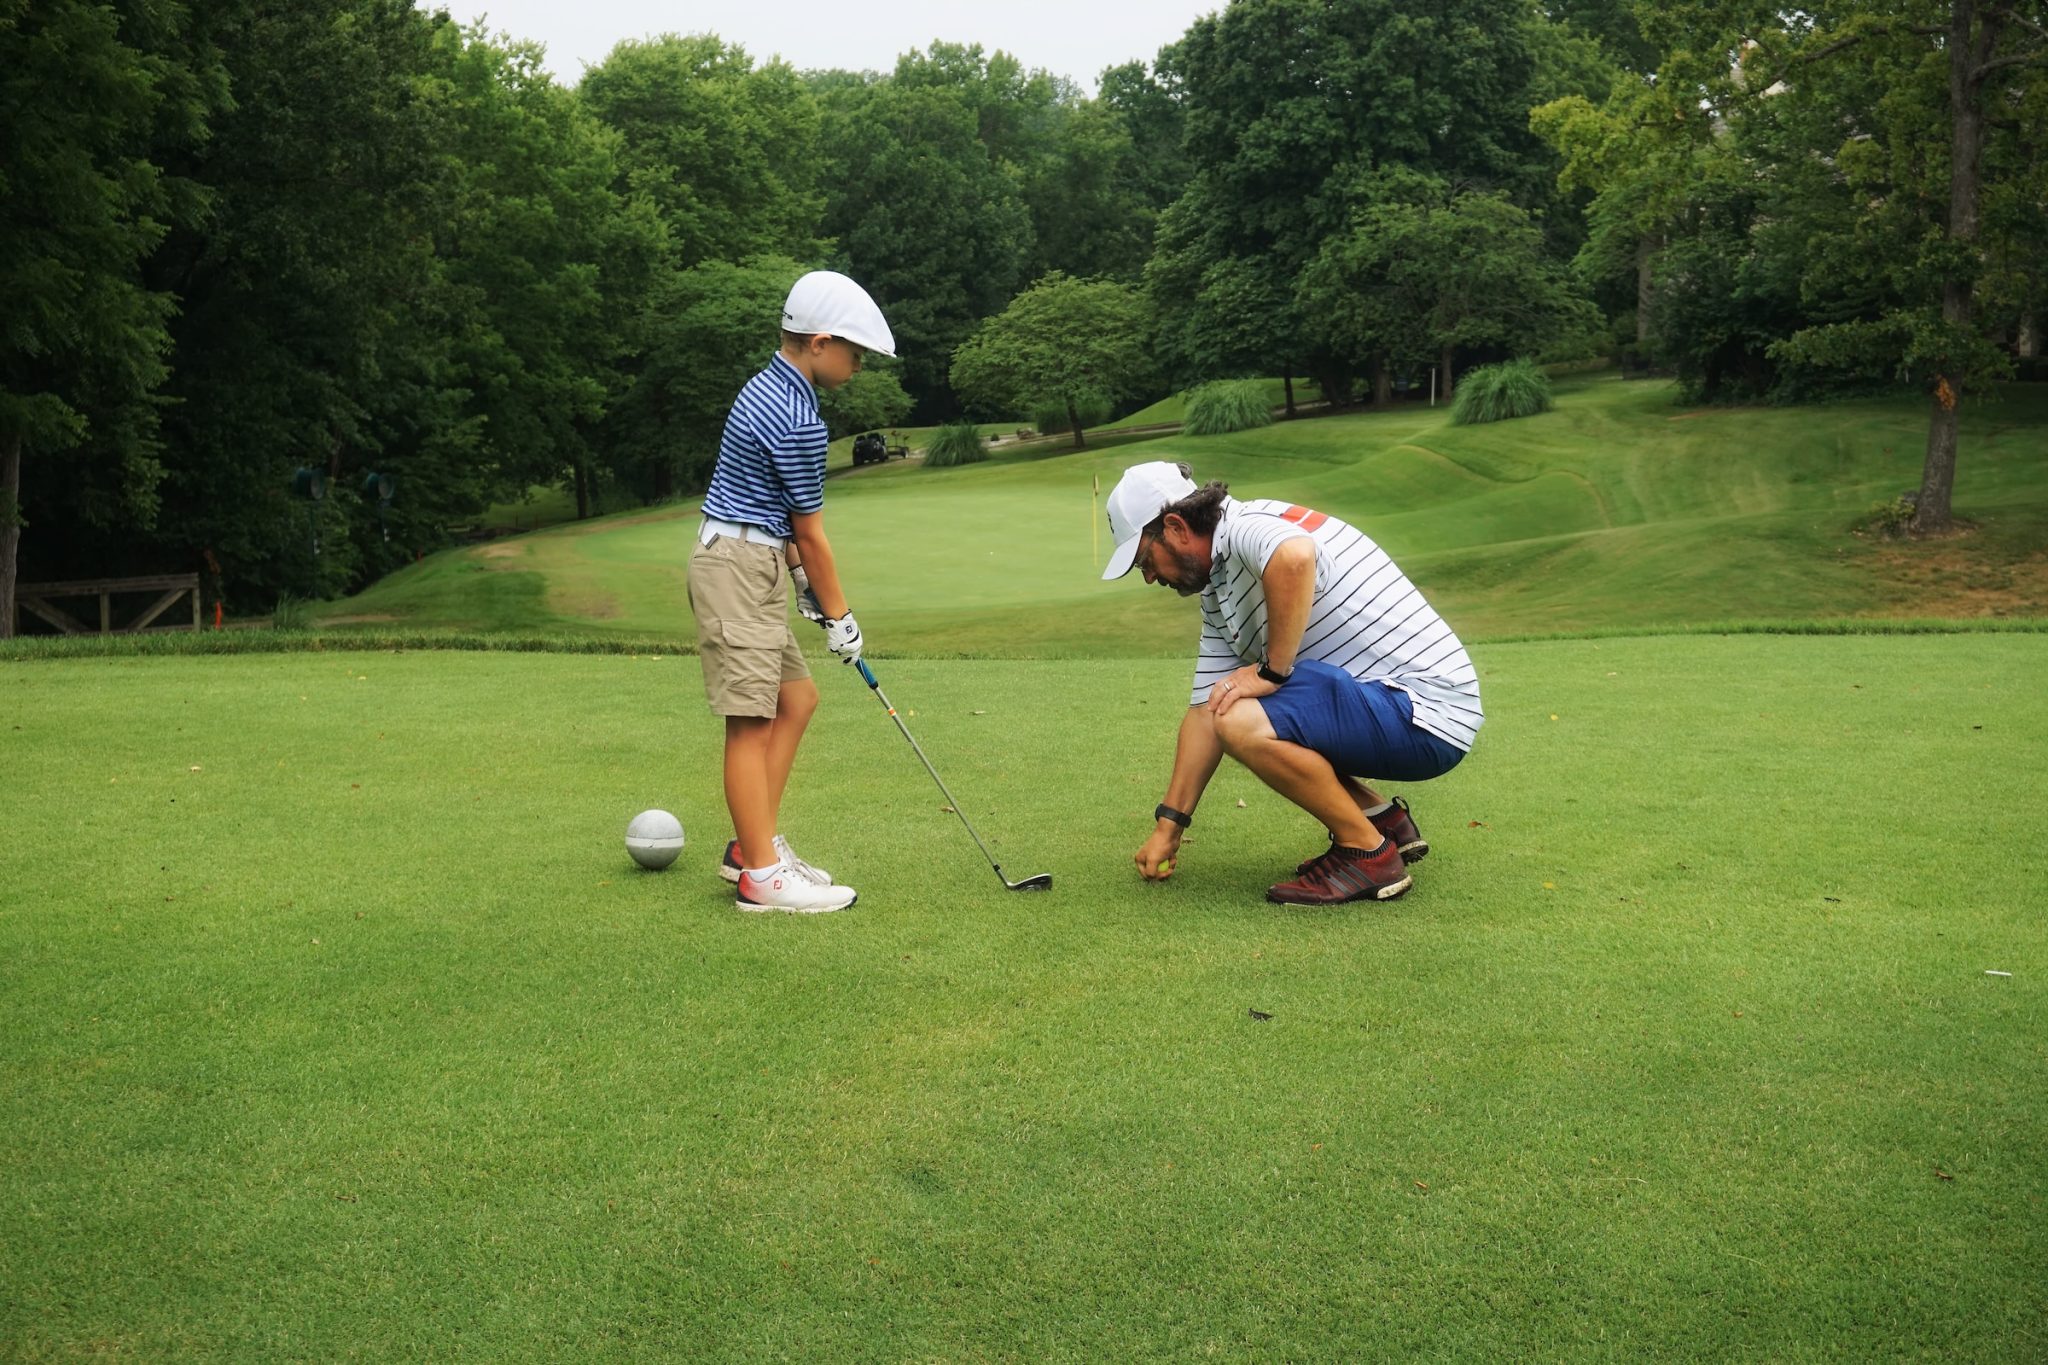 Know your game: starter guide for picking quality golf equipment